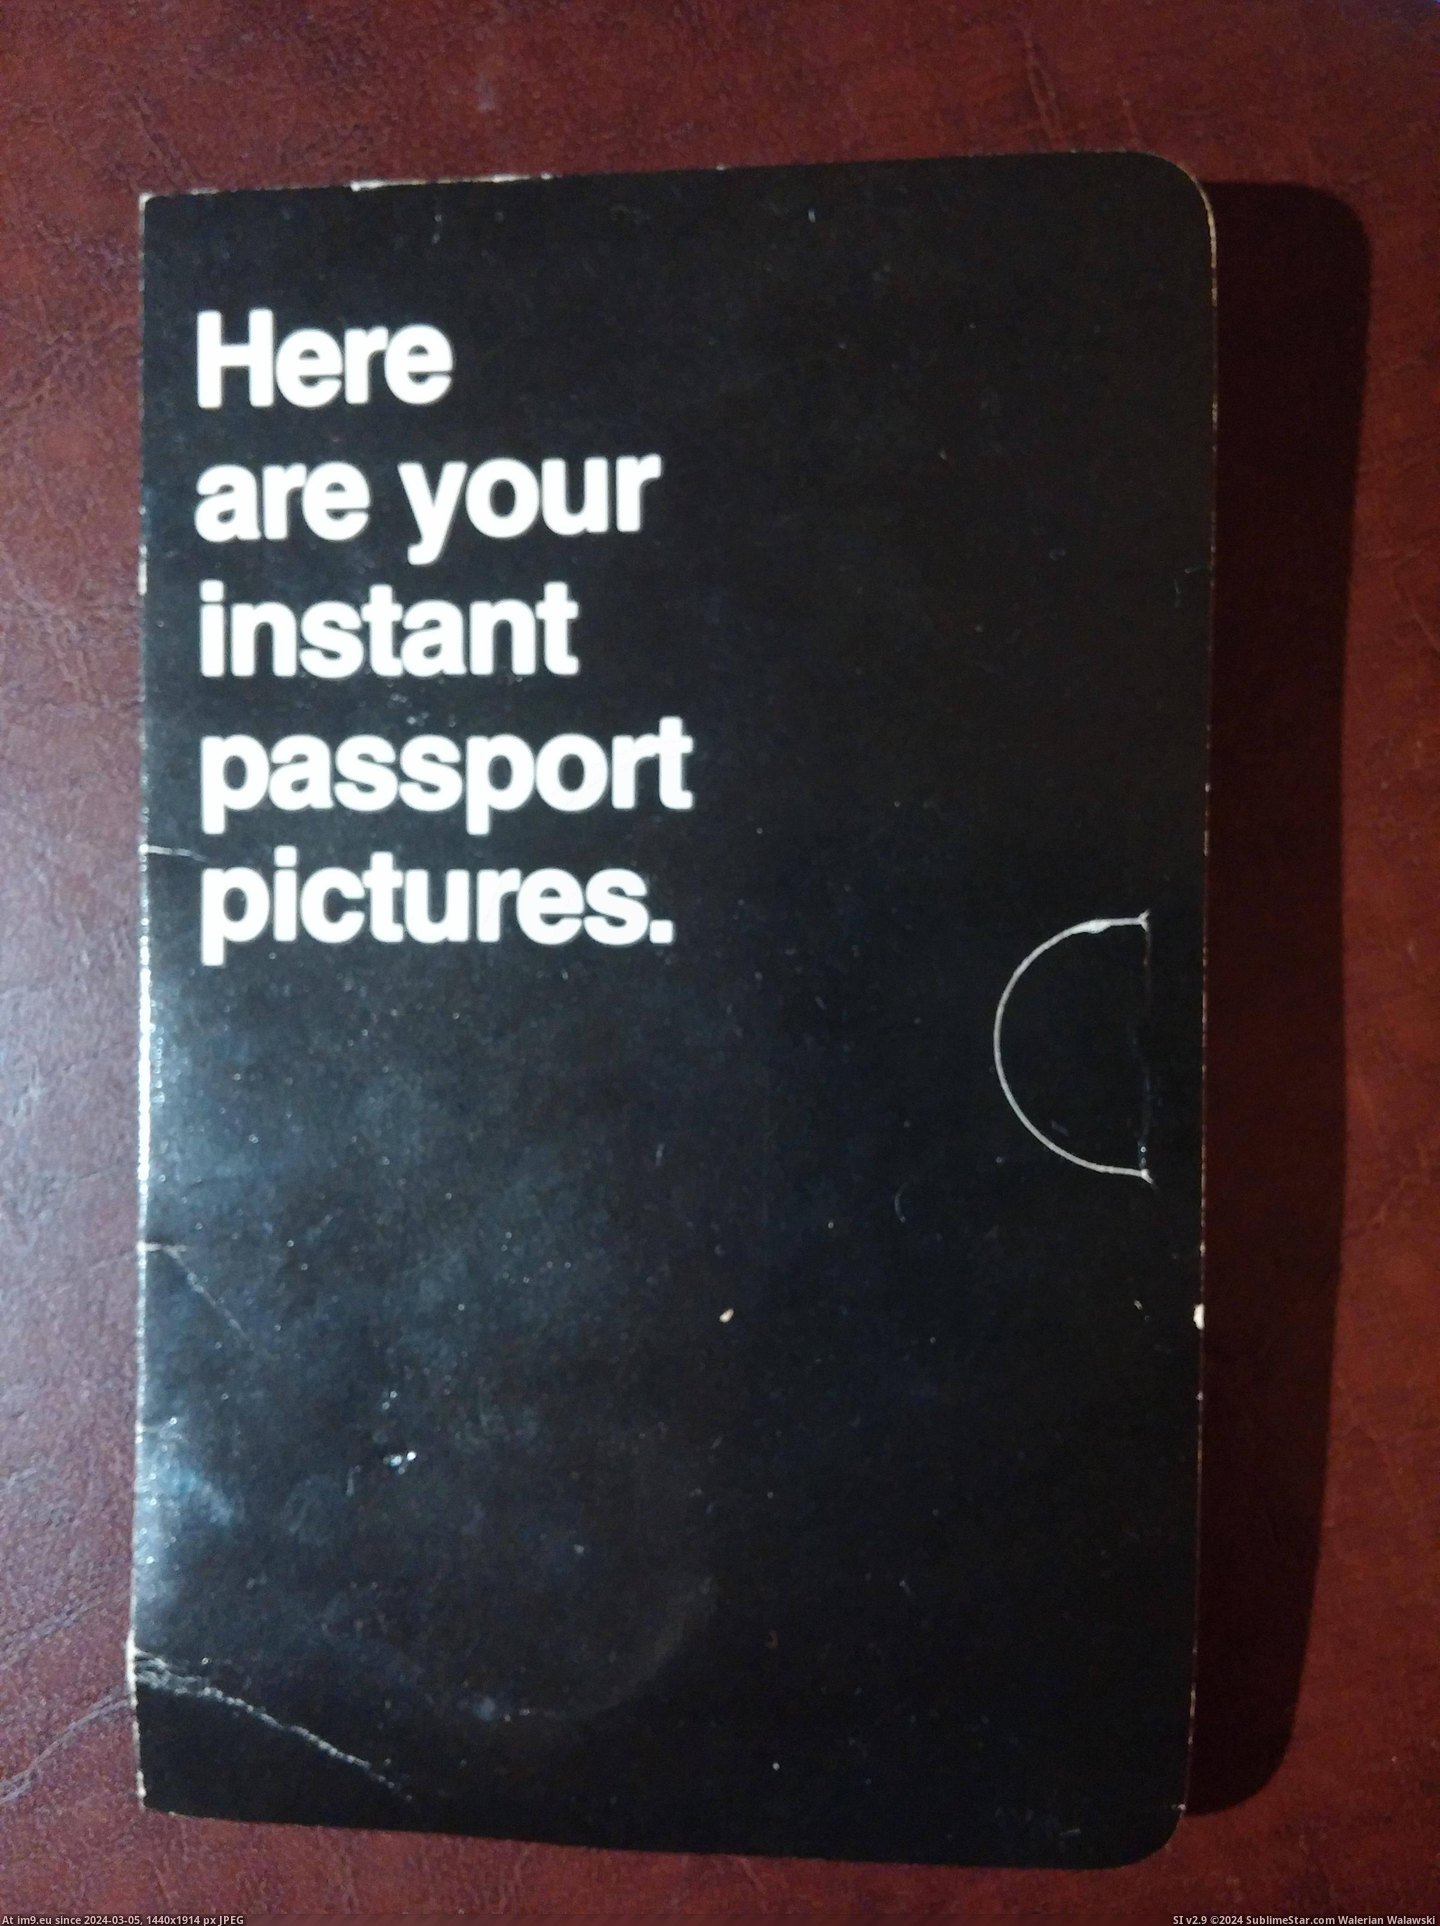 #Photo #Card #80s #Envelope #Passport #Humanity #Cards [Mildlyinteresting] This passport photo envelope from the '80s looks like a Cards Against Humanity card Pic. (Изображение из альбом My r/MILDLYINTERESTING favs))